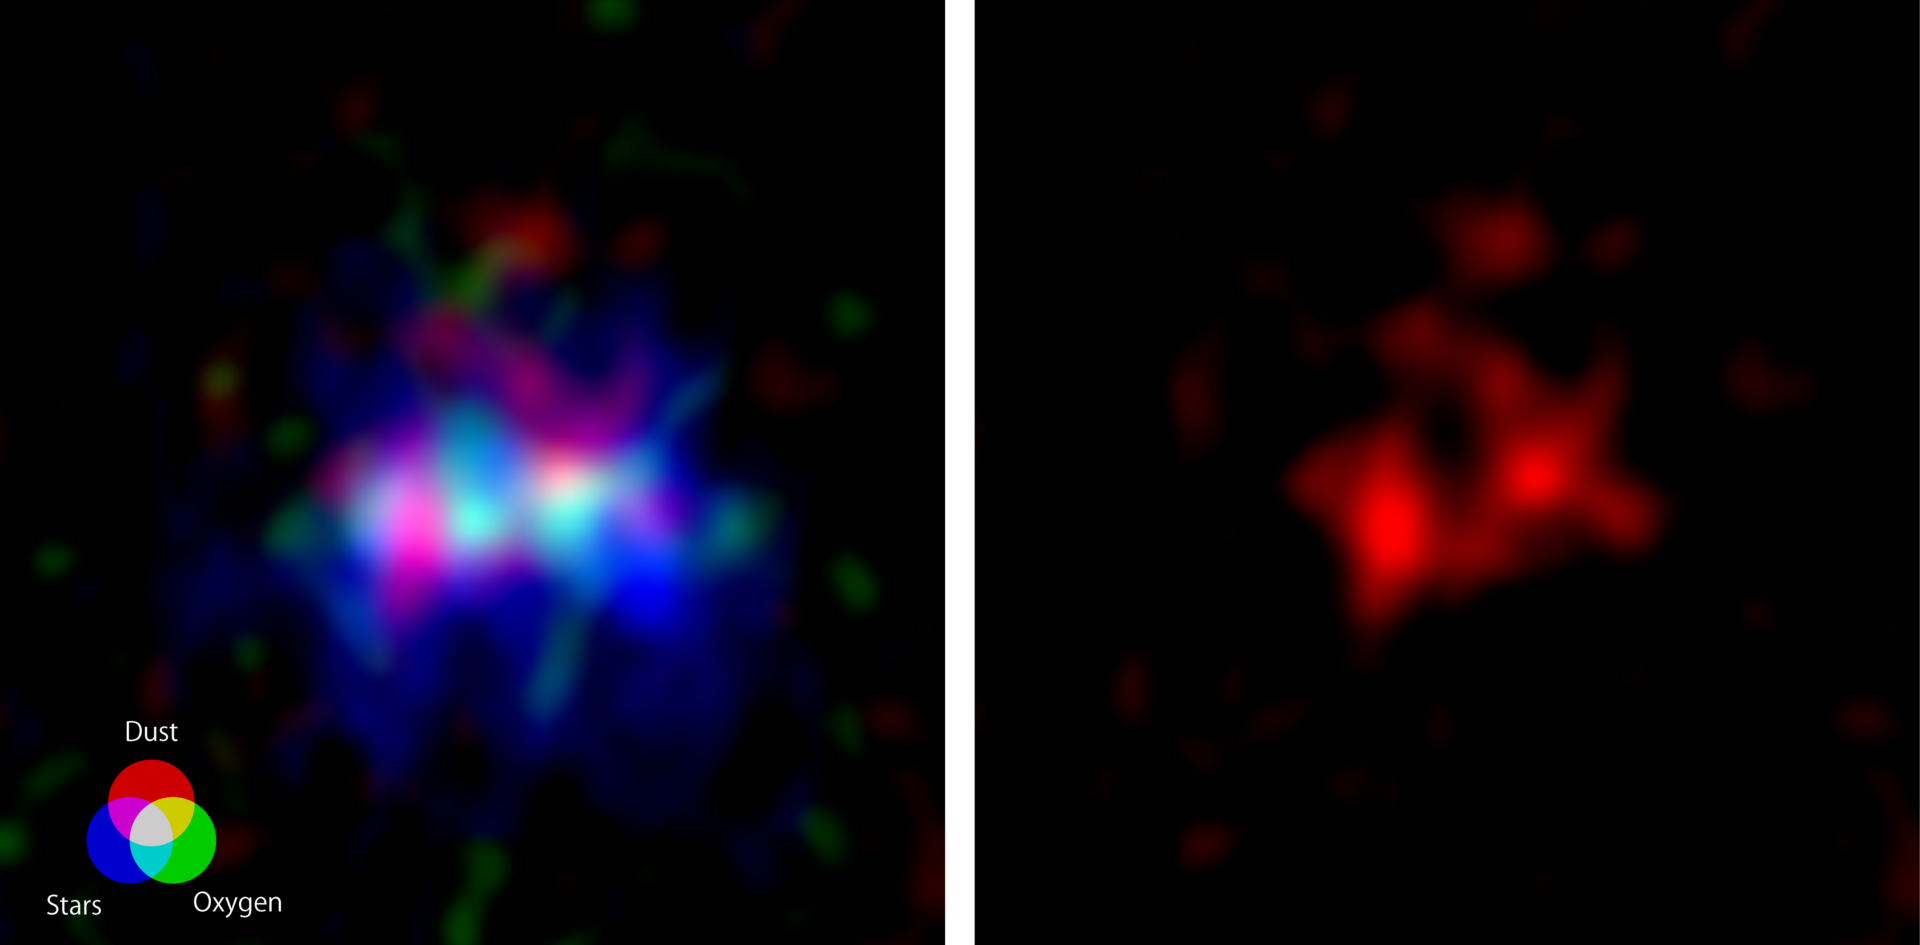 The ALMA image of the galaxy MACS0416_Y1 located 13.2 billion light-years away, harboring the farthest ever dark nebula. The image spans approximately 15,000 light-years on each side. (Left) Radio images captured by ALMA depicting the dark nebula (emitting radio waves from dust, shown in red) and the emission nebula (emitting radio waves from oxygen, green), along with the image of stars captured by the Hubble Space Telescope (blue). Credit: ALMA (ESO/NAOJ/NRAO), Y. Tamura et al., NASA/ESA Hubble Space Telescope. (Right) Image captured by ALMA, only showing the radio waves emitted by the dust within the dark nebula. A vertically elongated elliptical cavity, a candidate for a superbubble, is visible in the central region." Credit: ALMA (ESO/NAOJ/NRAO), Y. Tamura et al.